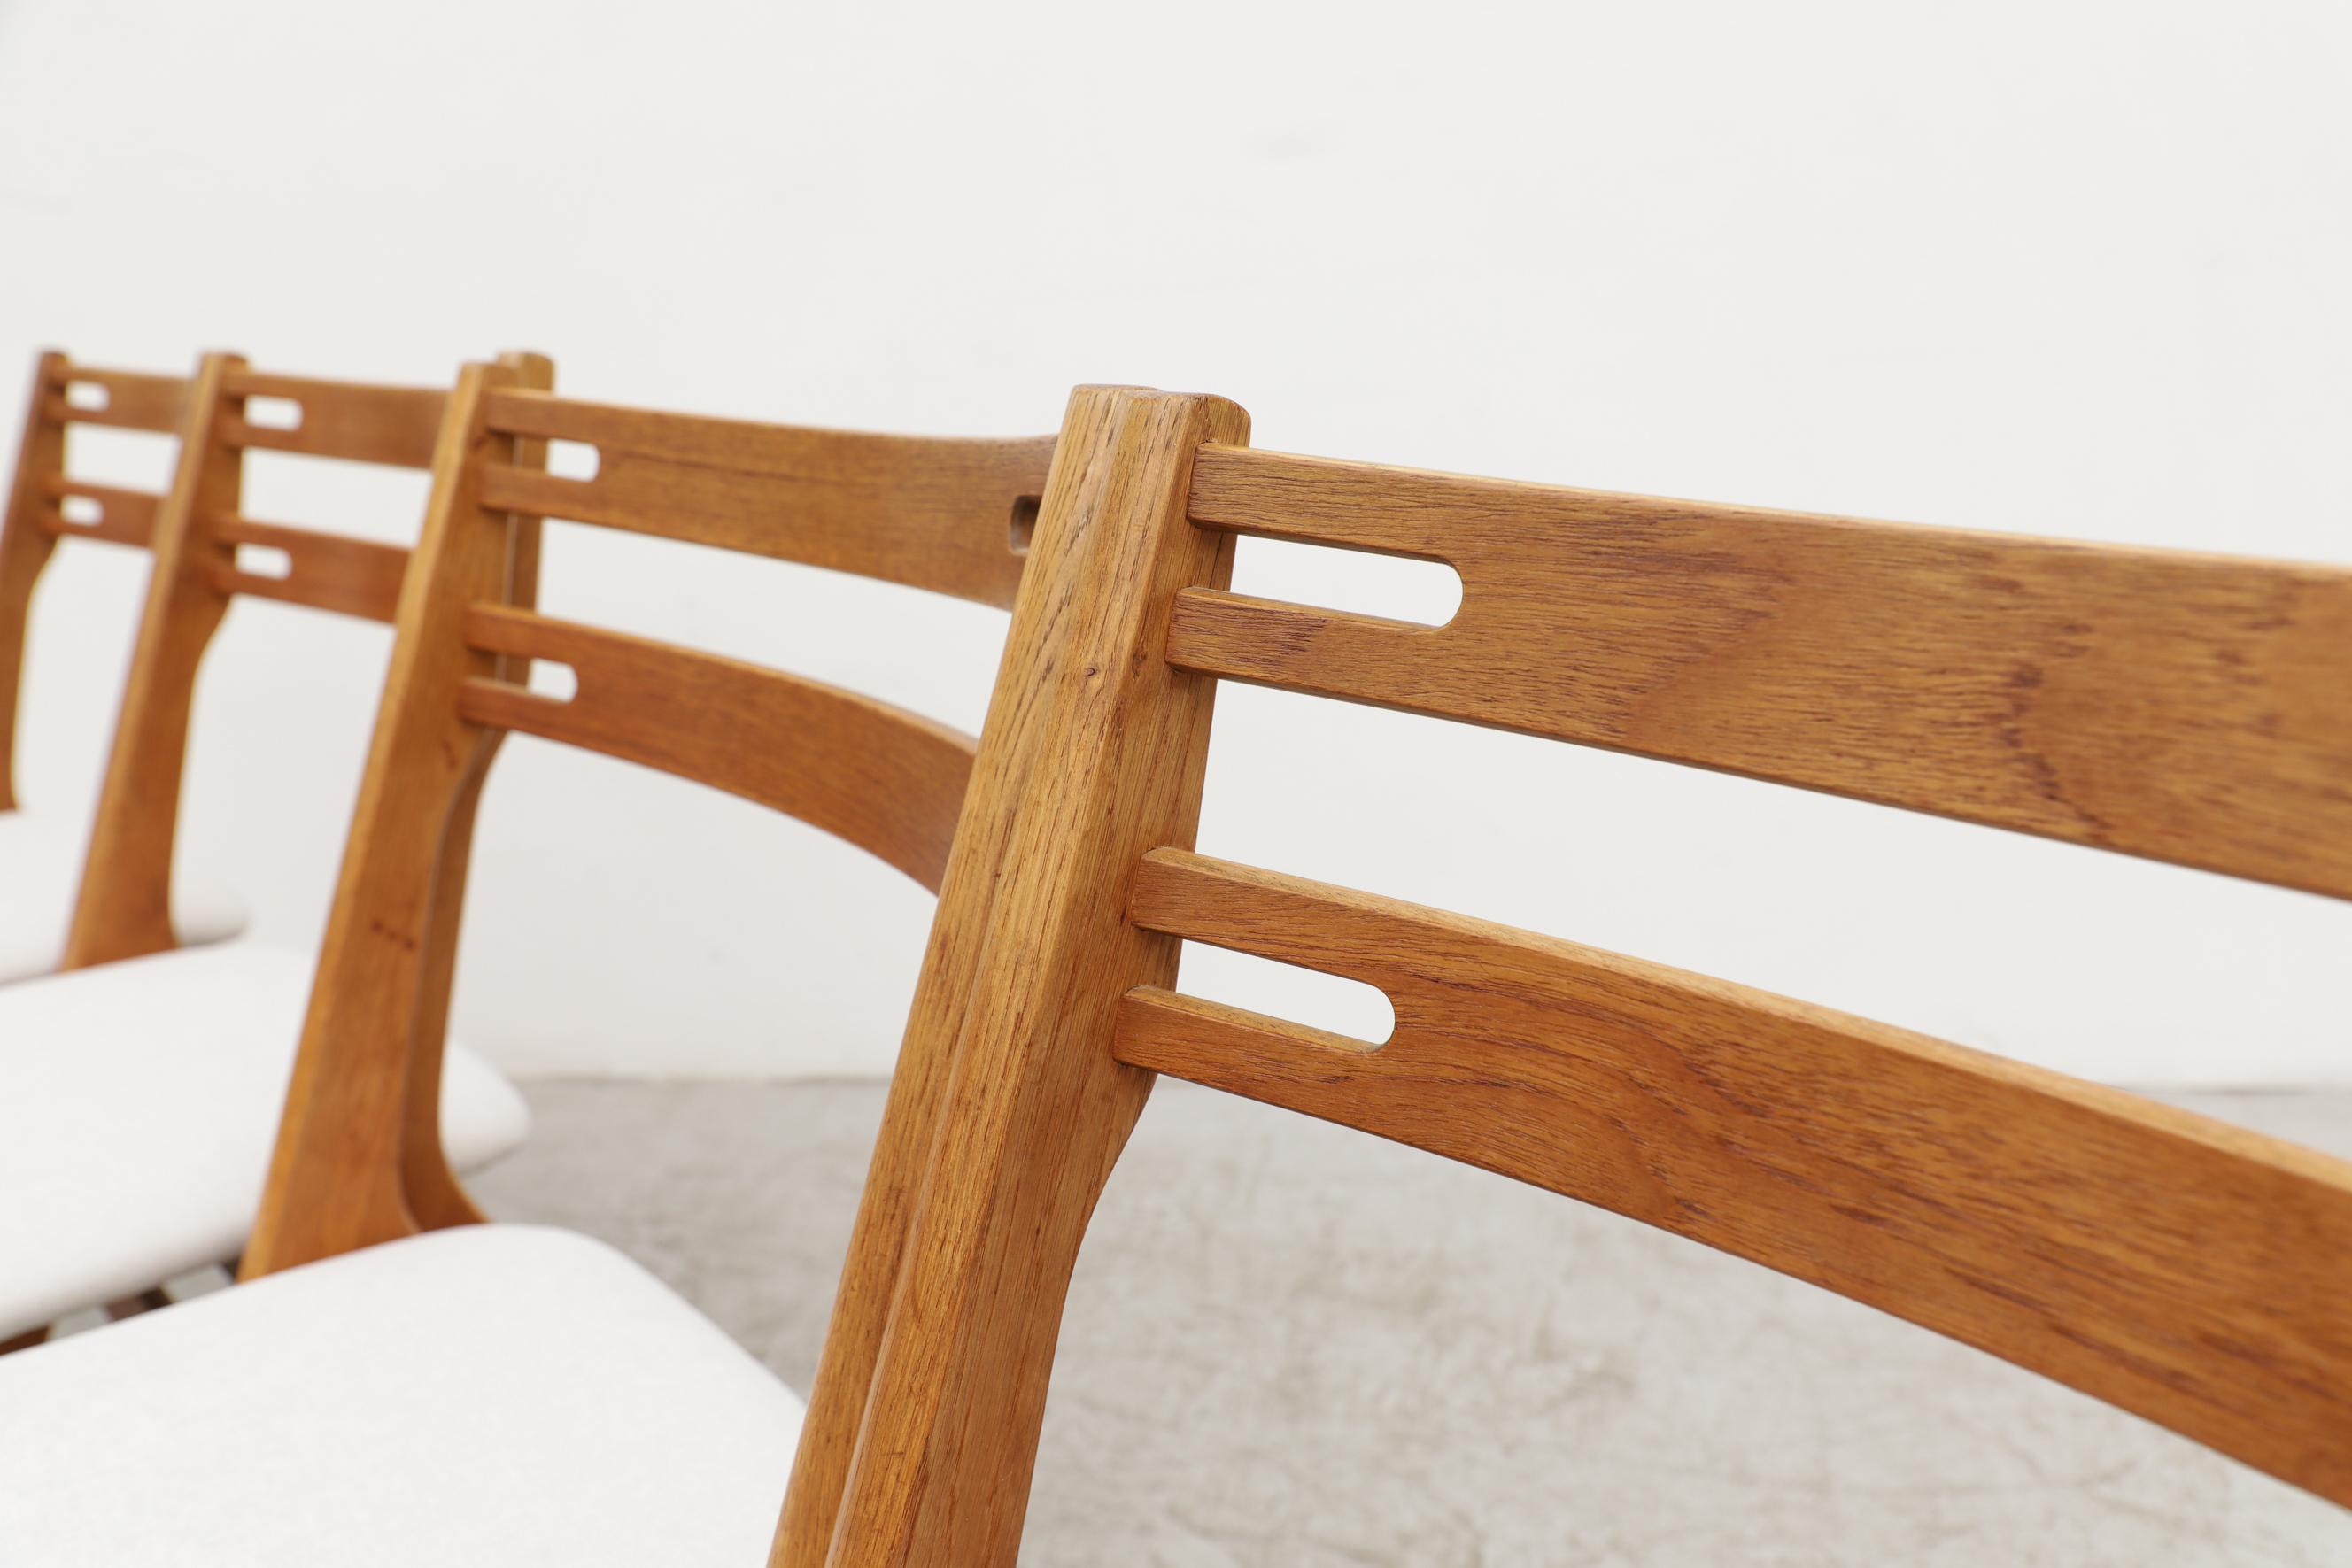 Set of 4 Hans Wegner Inspired Oak Dining Chairs by Sibast with White Seats In Good Condition For Sale In Los Angeles, CA